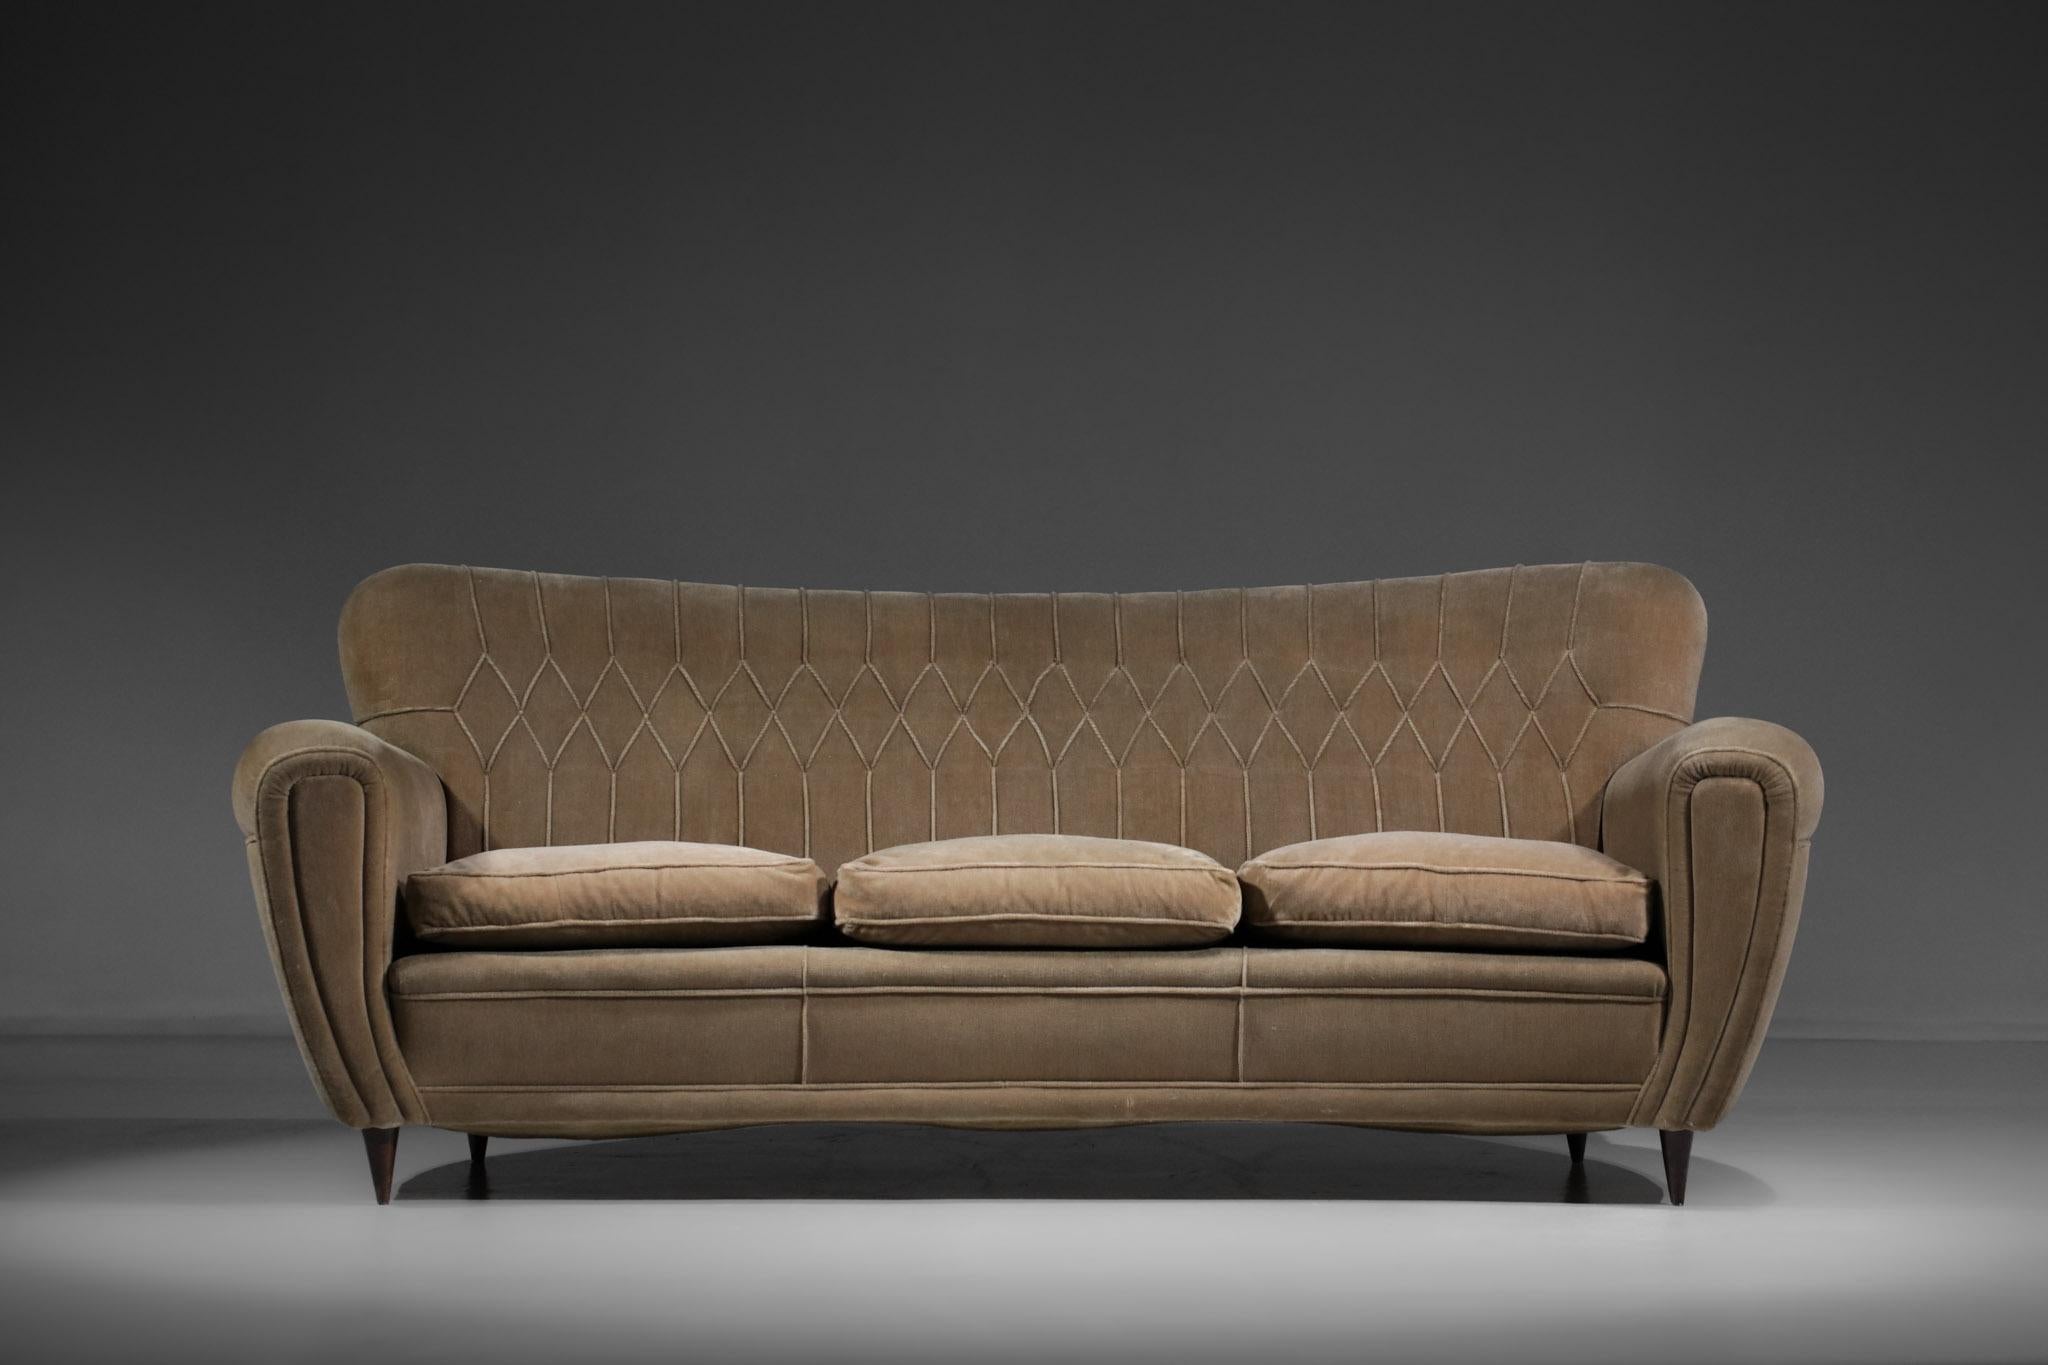 Large Italian sofa from the 1950s attributed to the famous designer Gio Ponti. Three to four seater sofa in light brown alcantara, very nice rounded shape of the backrest and armrests for an enveloping and voluptuous effect typical of Gio Ponti's